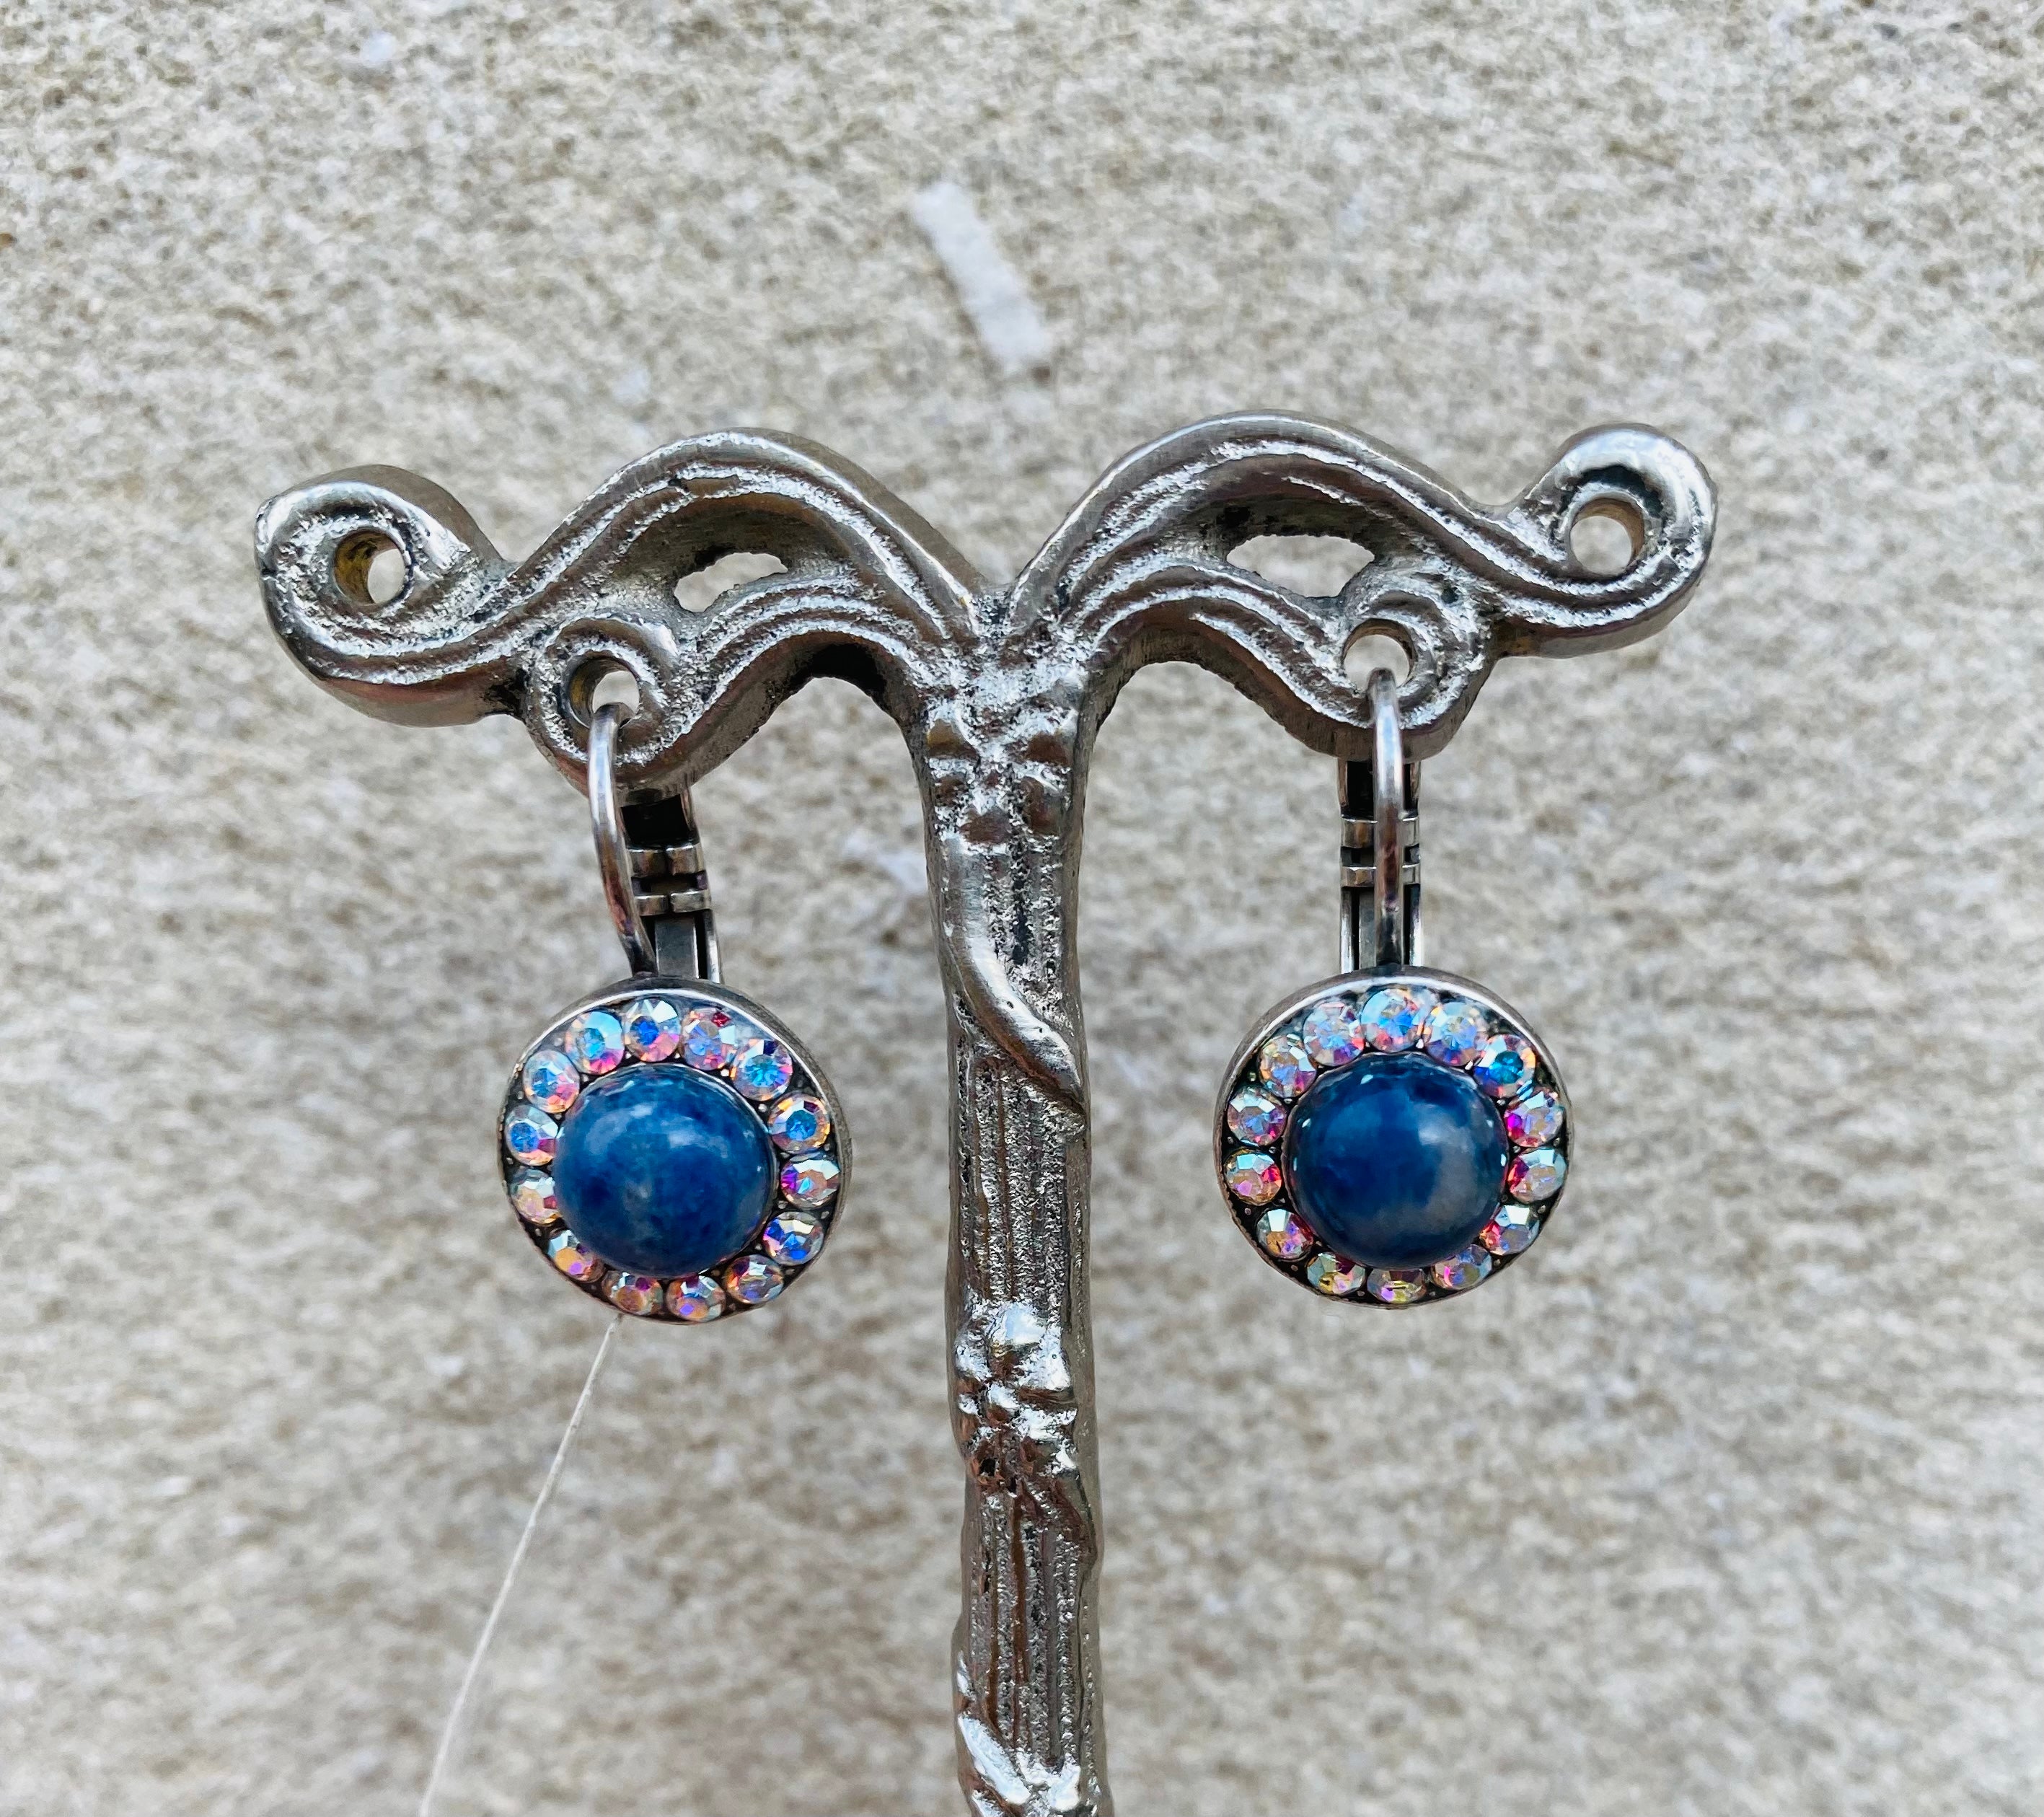 Mariana Antique Silver Must-Have Pave Crystal Leverback Earrings in "Mood Indigo”